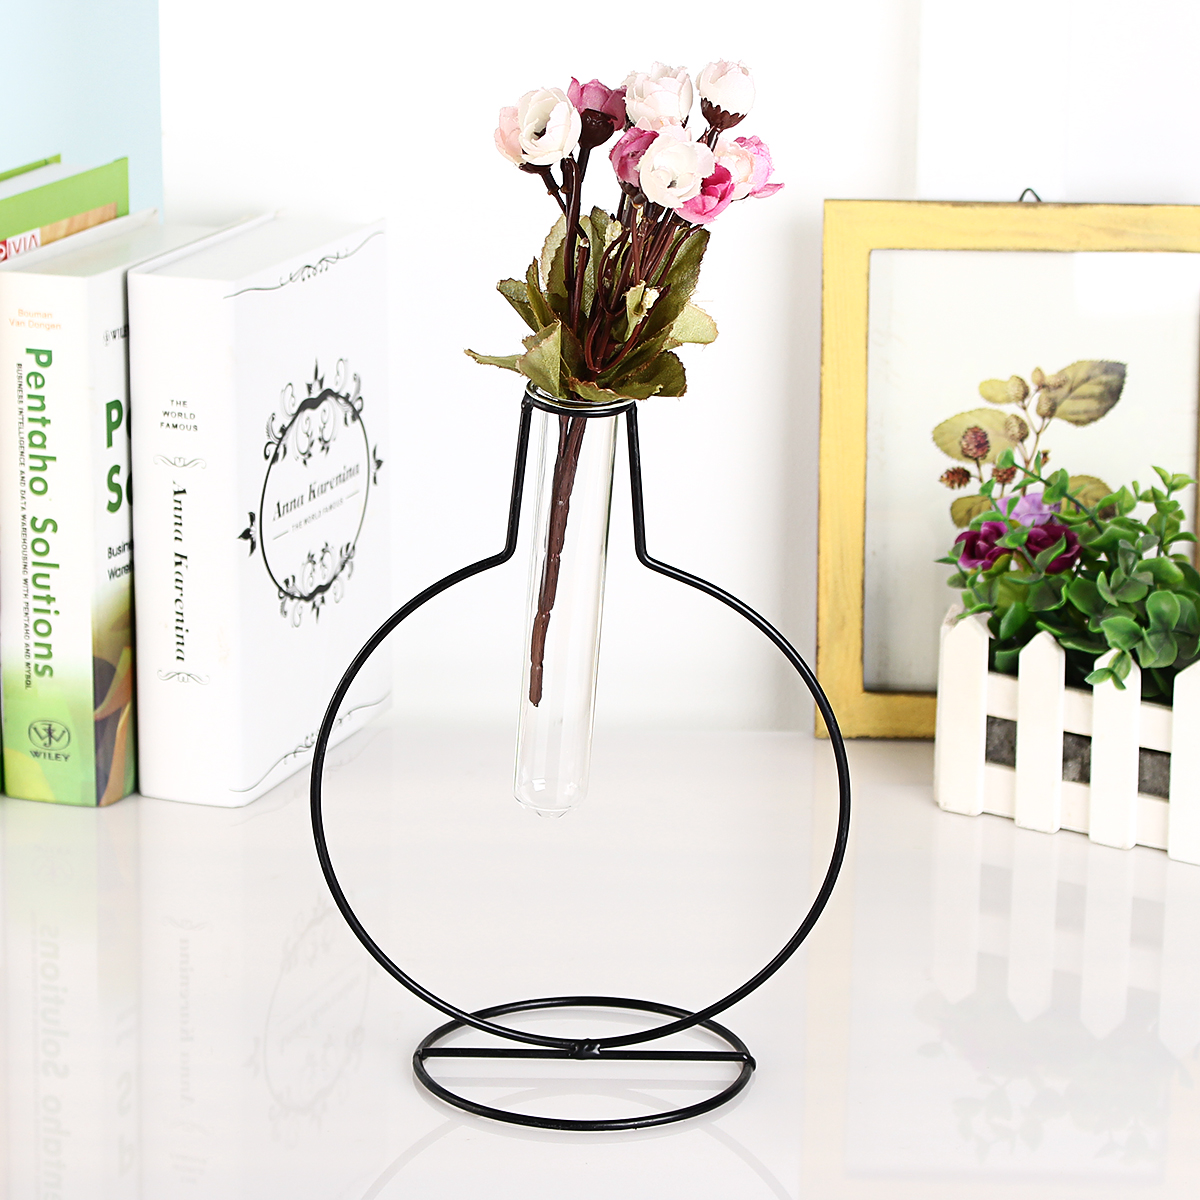 Flower-Vase-Holder-Plant-Display-with-Iron-Stand-and-Glass-Tube-for-Hydroponics-Ornament-Decorations-1447048-8